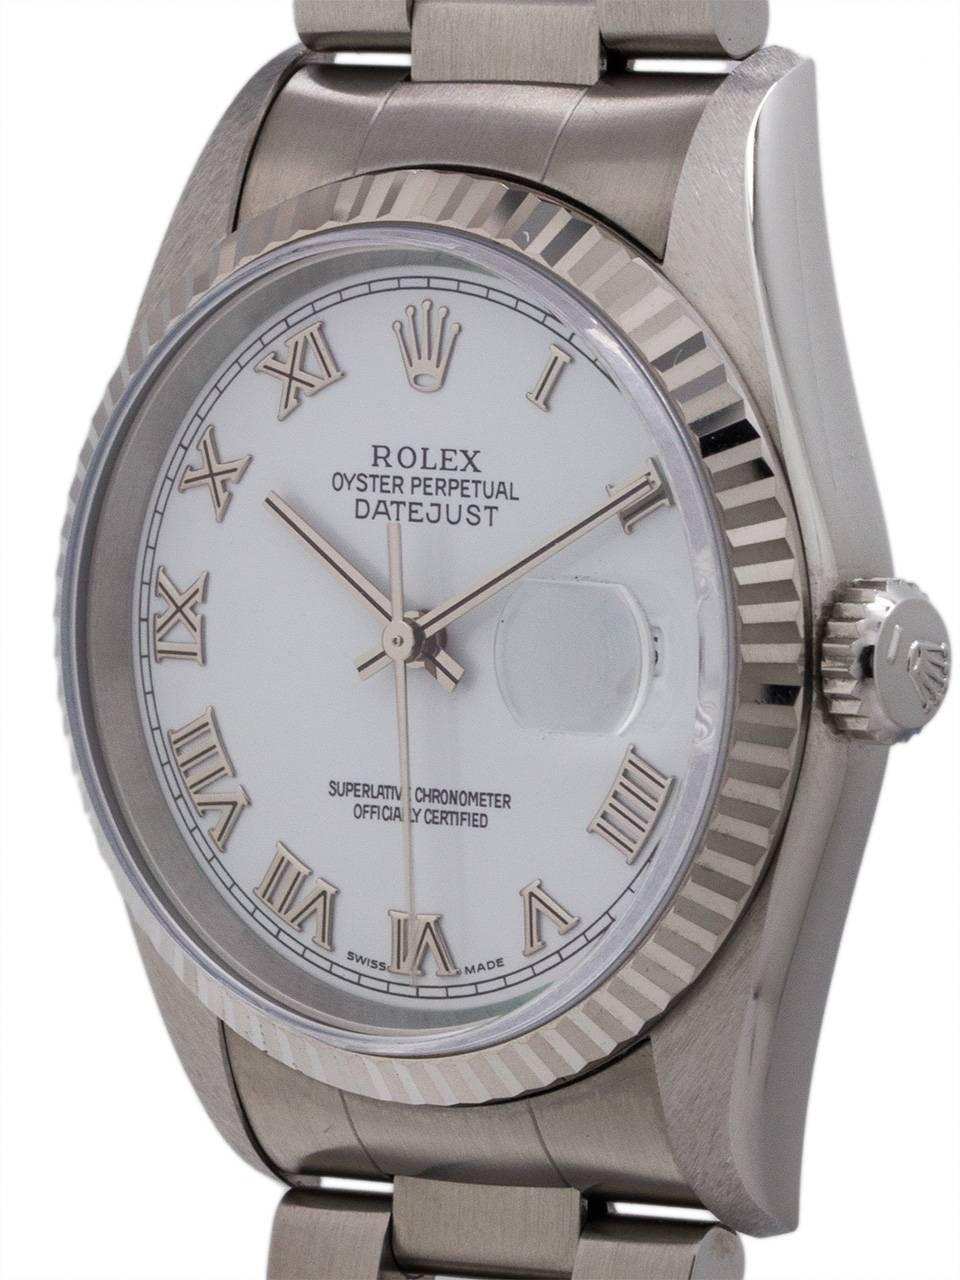 Rolex Datejust ref 16234 serial # T3 circa 1996. Full size man’s model 36mm diameter stainless steel with 18K white gold fluted bezel with sapphire crystal. Featuring white enamel dial  with applied silver heavy Roman indexes and silver baton hands.